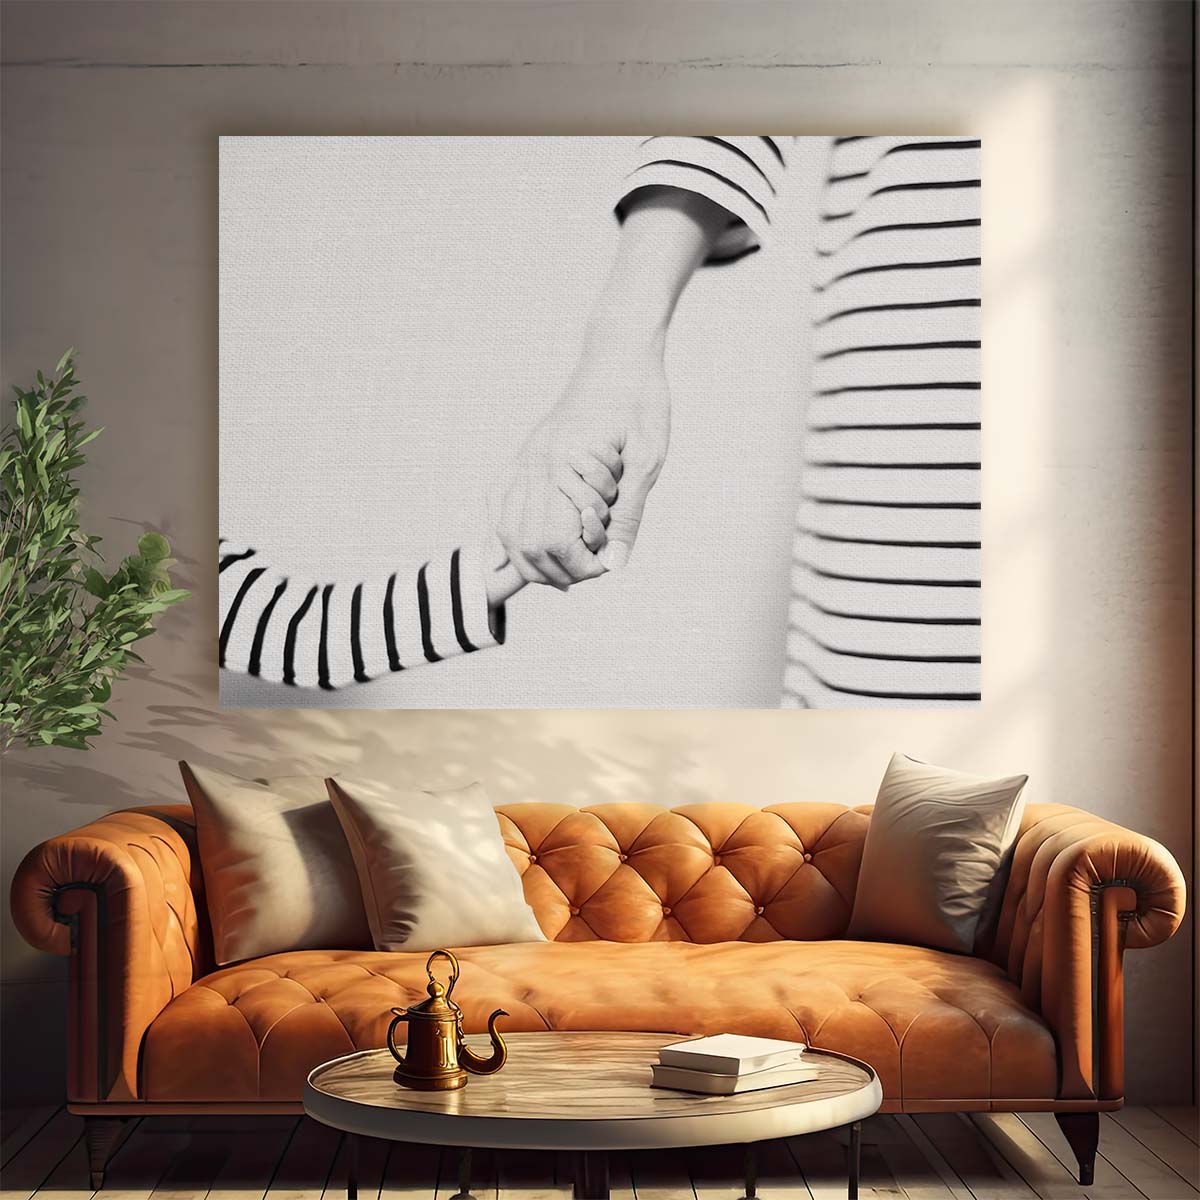 Monochrome Mother and Daughter Holding Hands Wall Art by Luxuriance Designs. Made in USA.